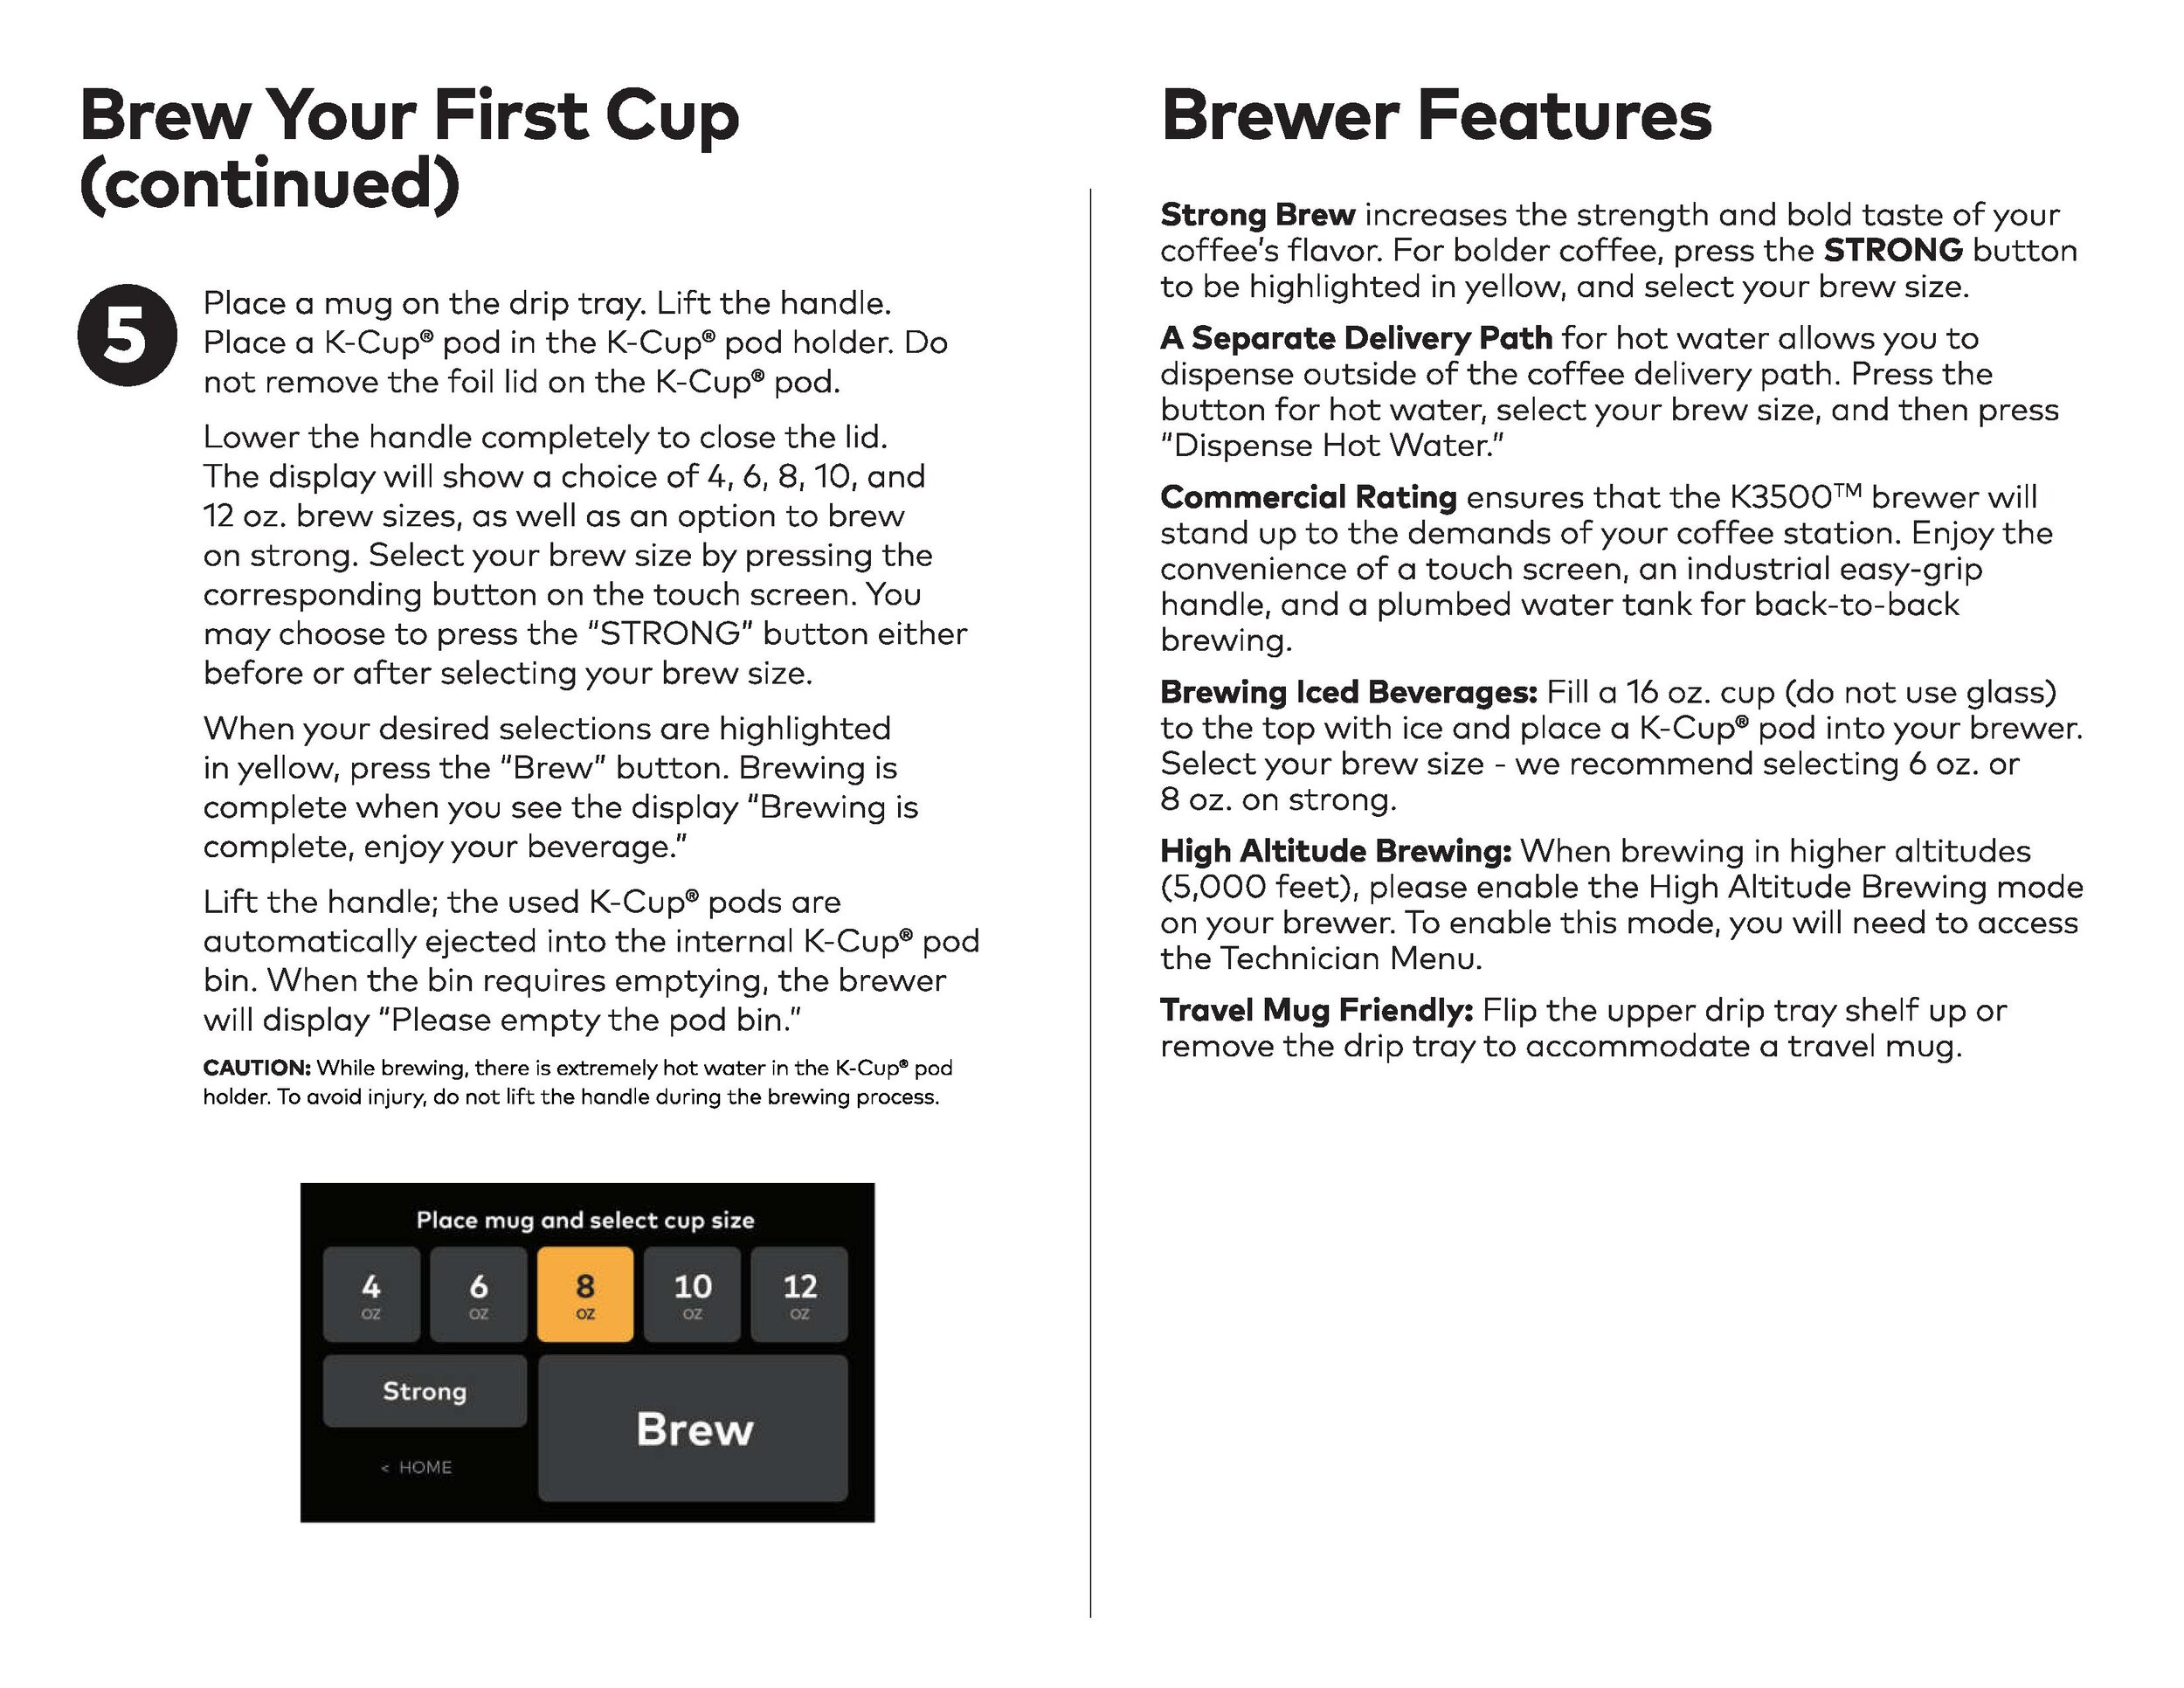 Brewer Features